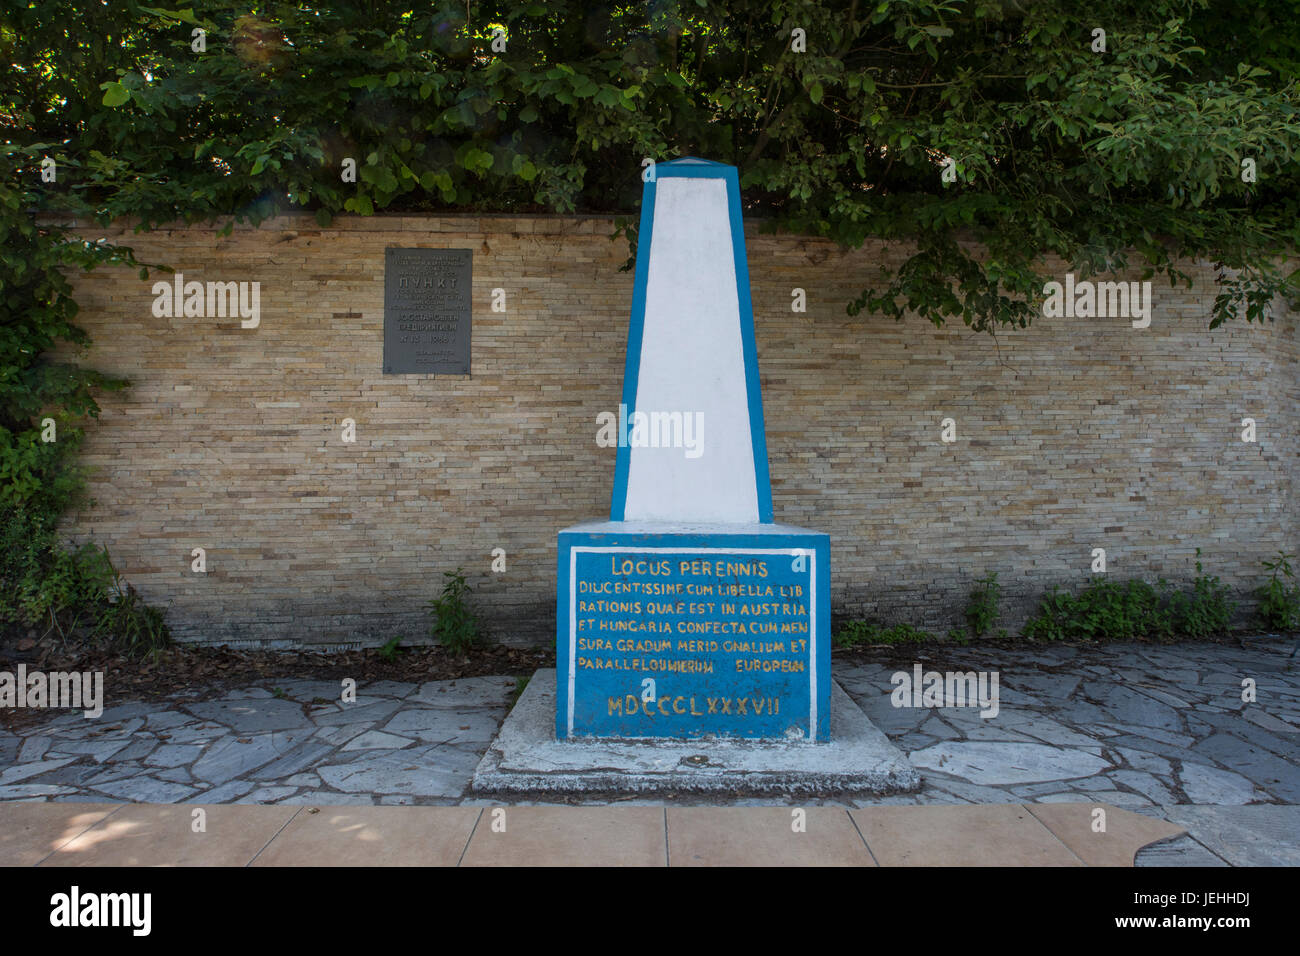 The monument to the geographical center of Europe in Ukraine Stock Photo